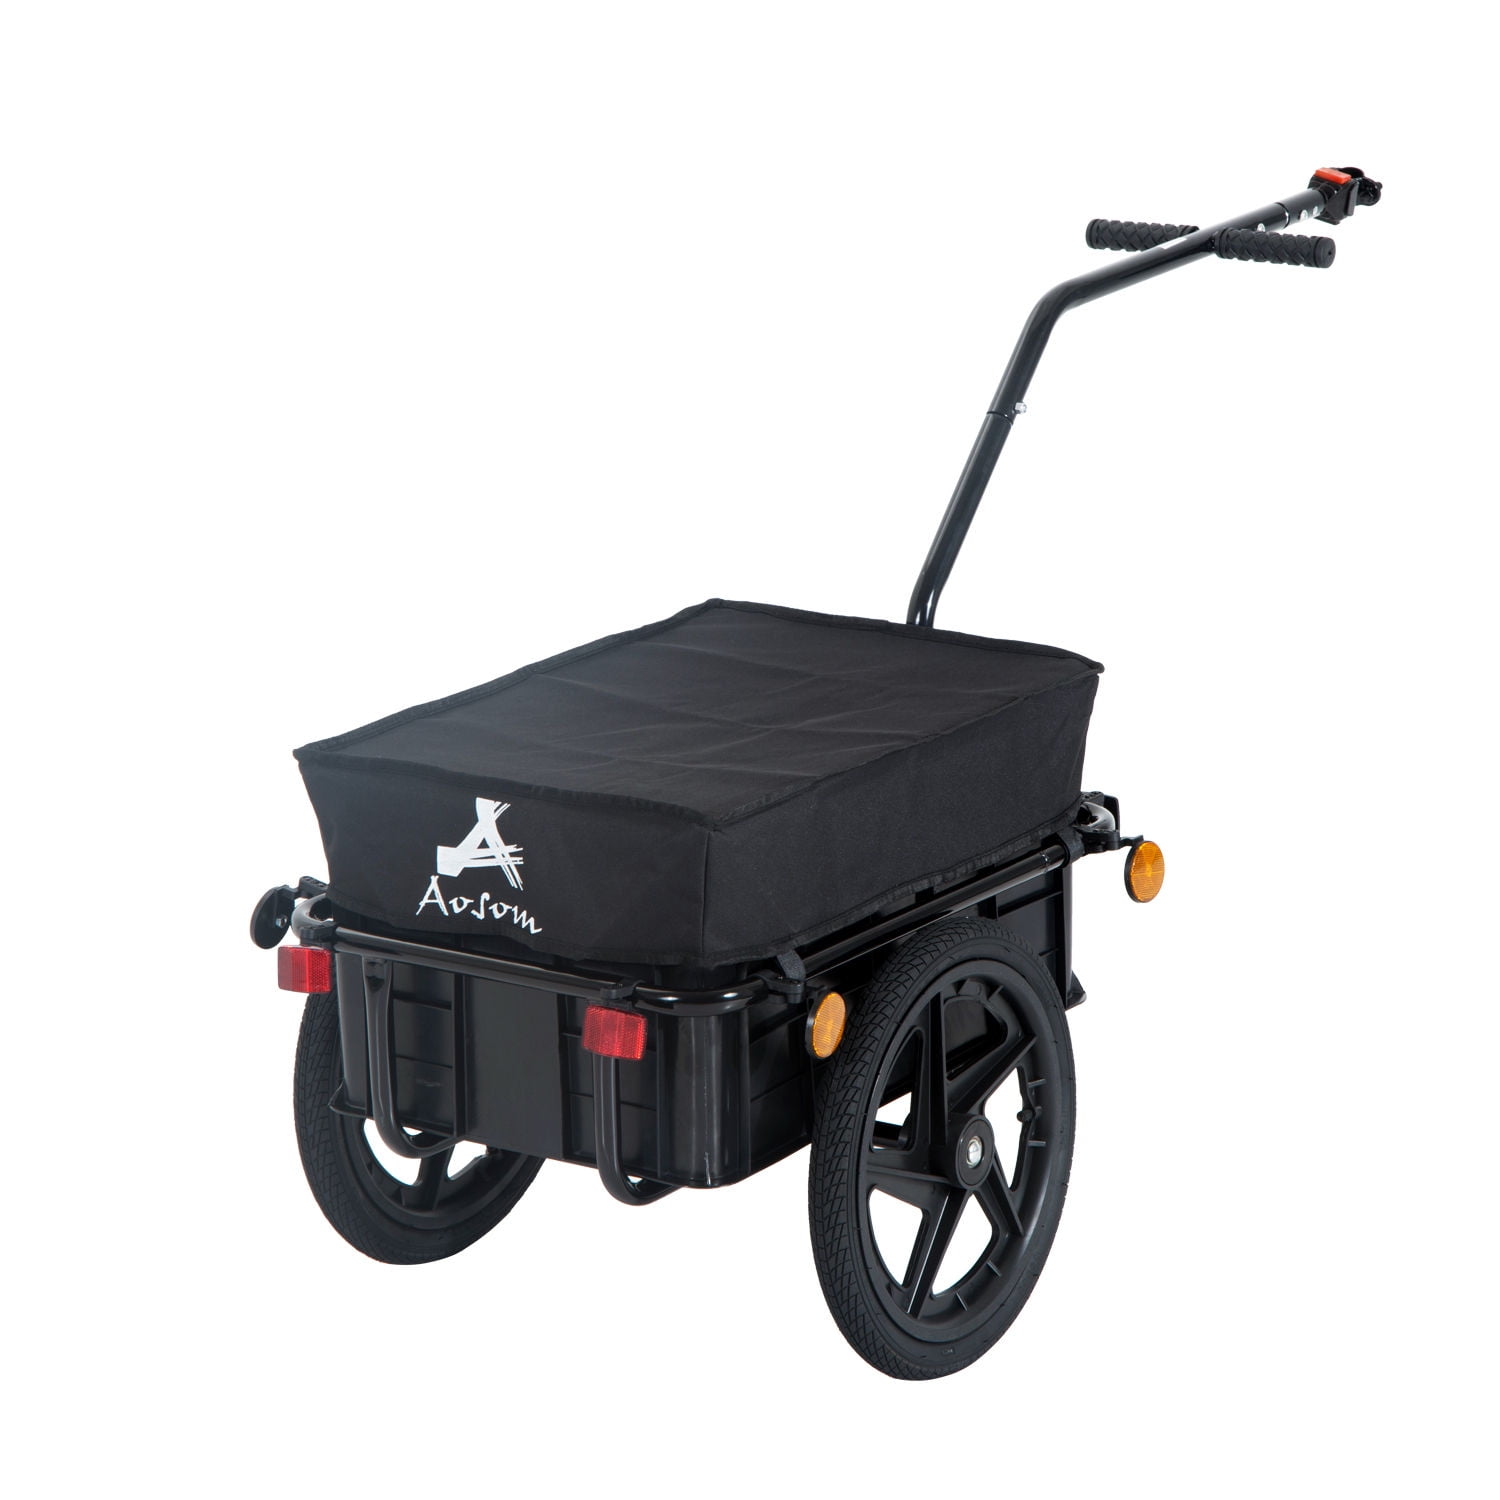 Model CZ2 Allen Sports Bicycle Cargo Trailer & Pull Cart 